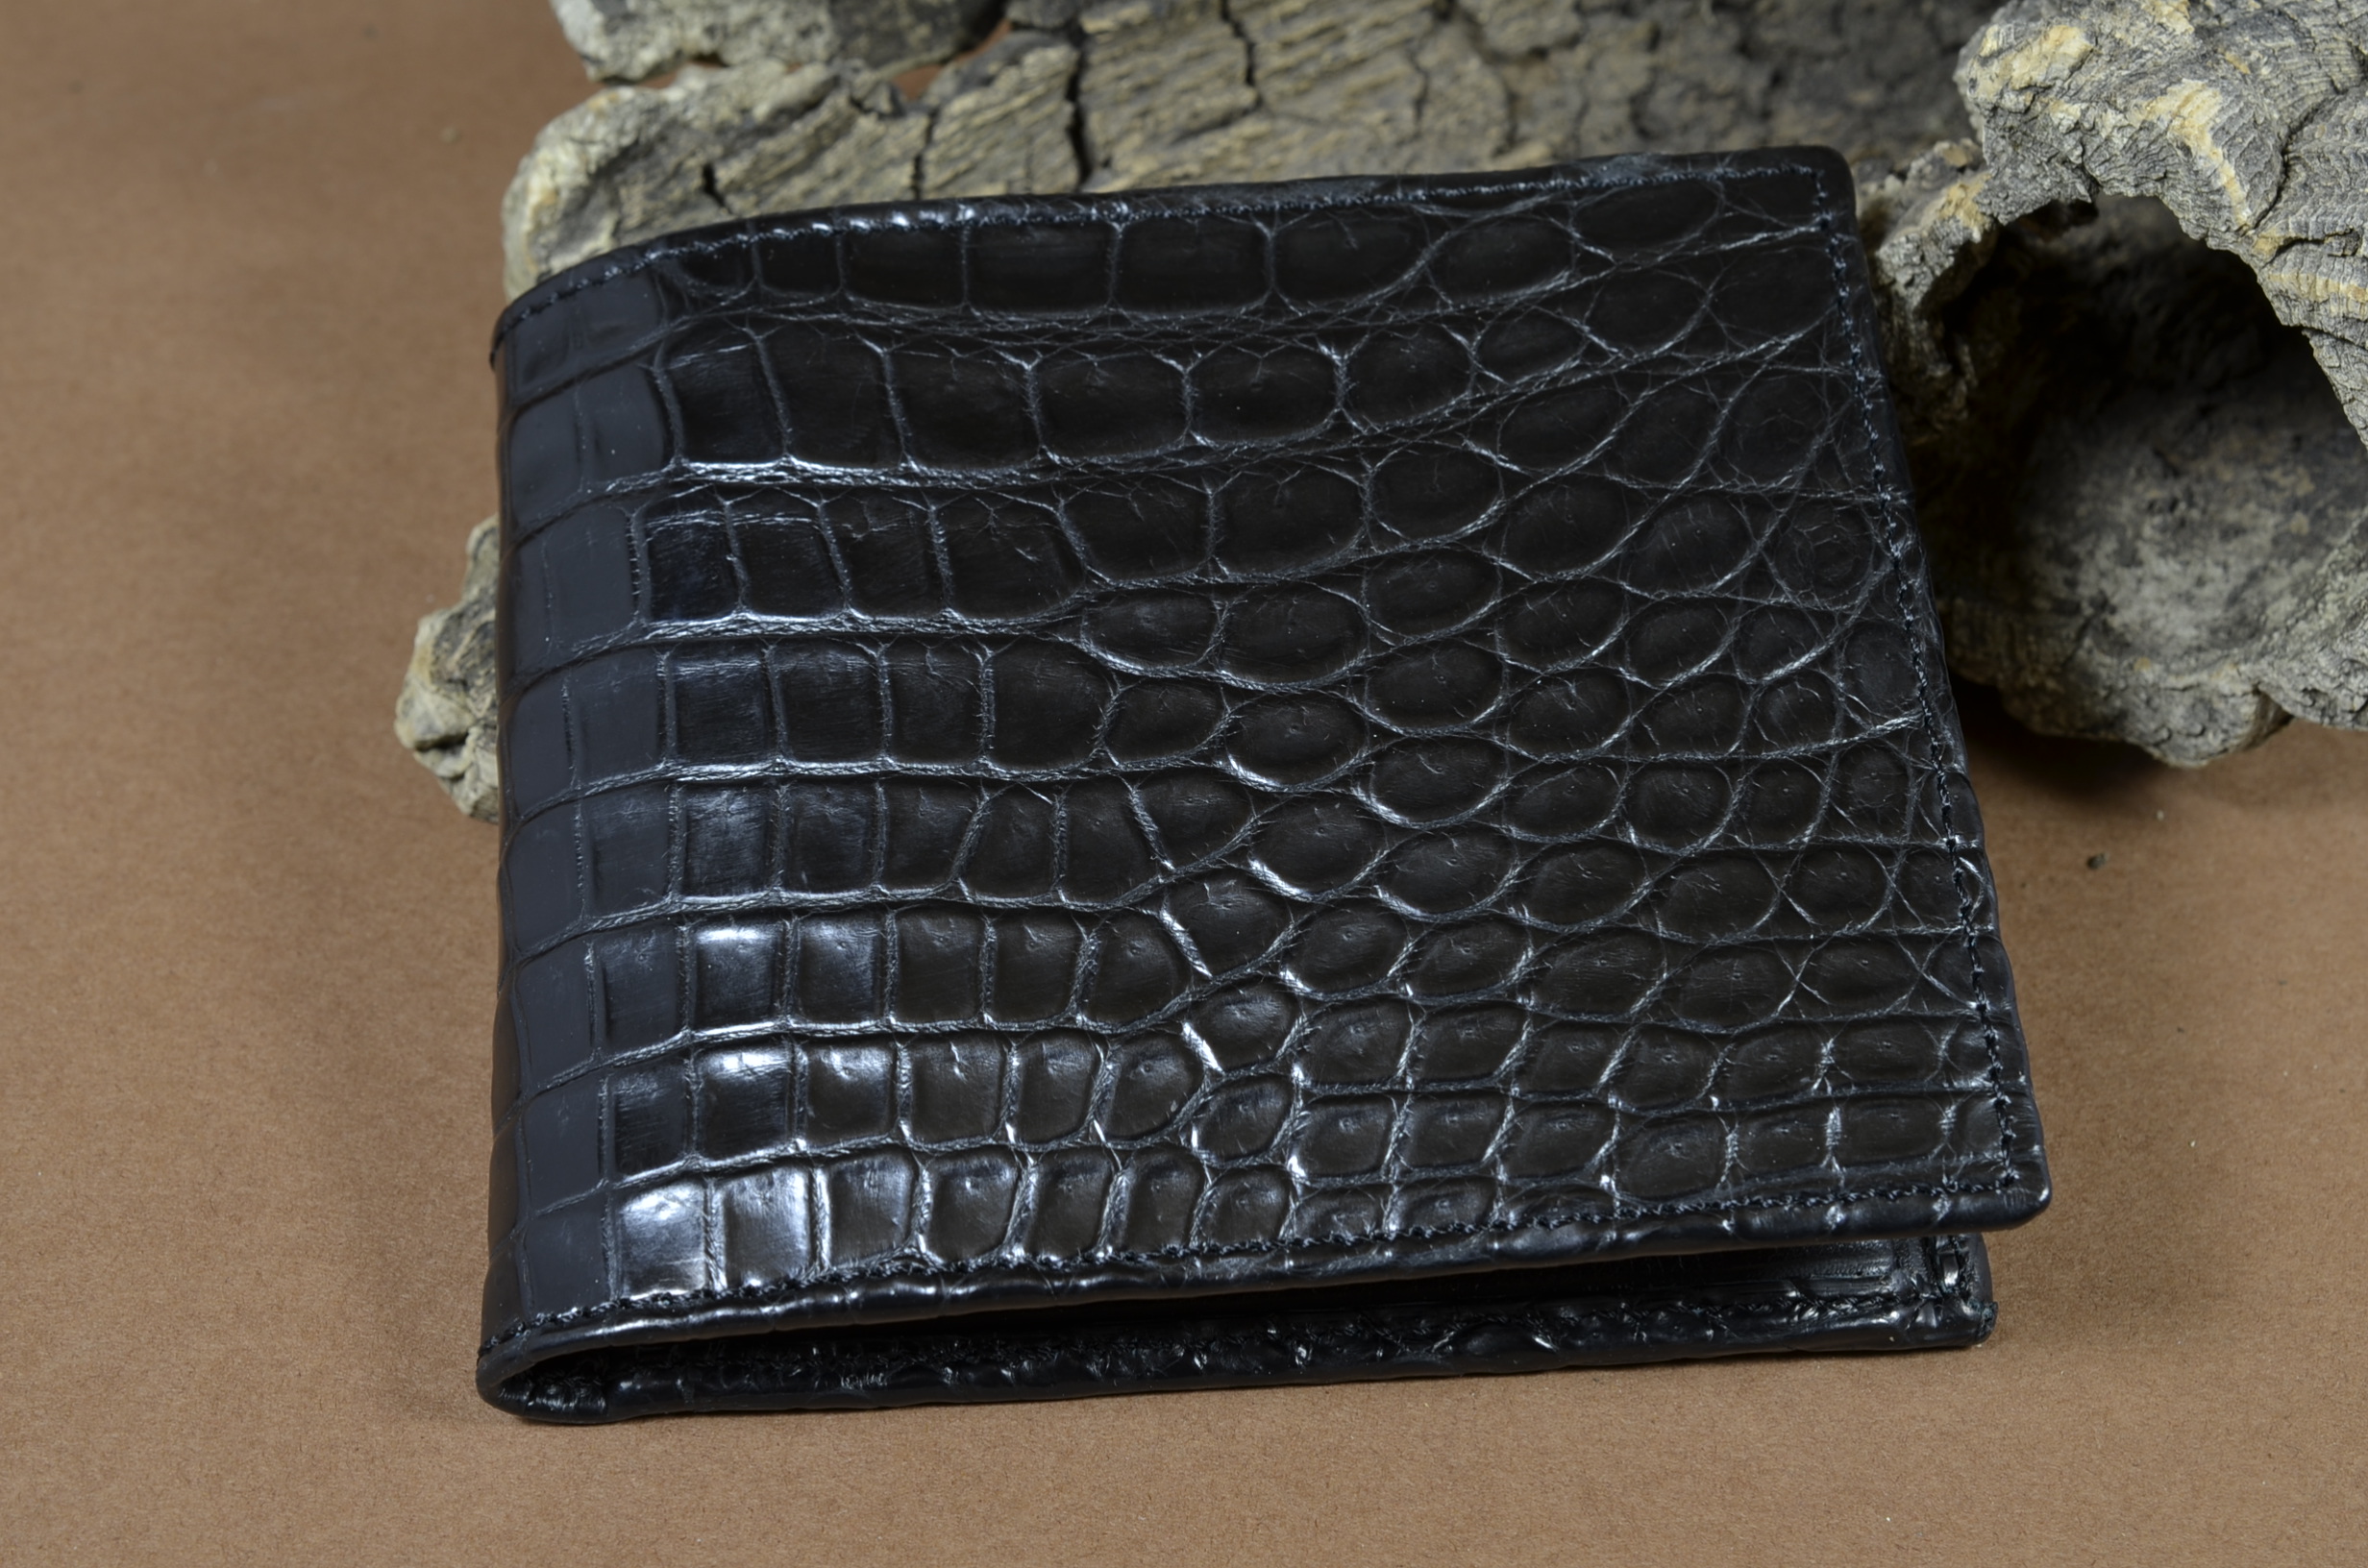 ROMA - ALLIGATOR 2 BLACK is one of our hand crafted wallets, made using alligator matte  & calf skin in the interior. Available in black color.